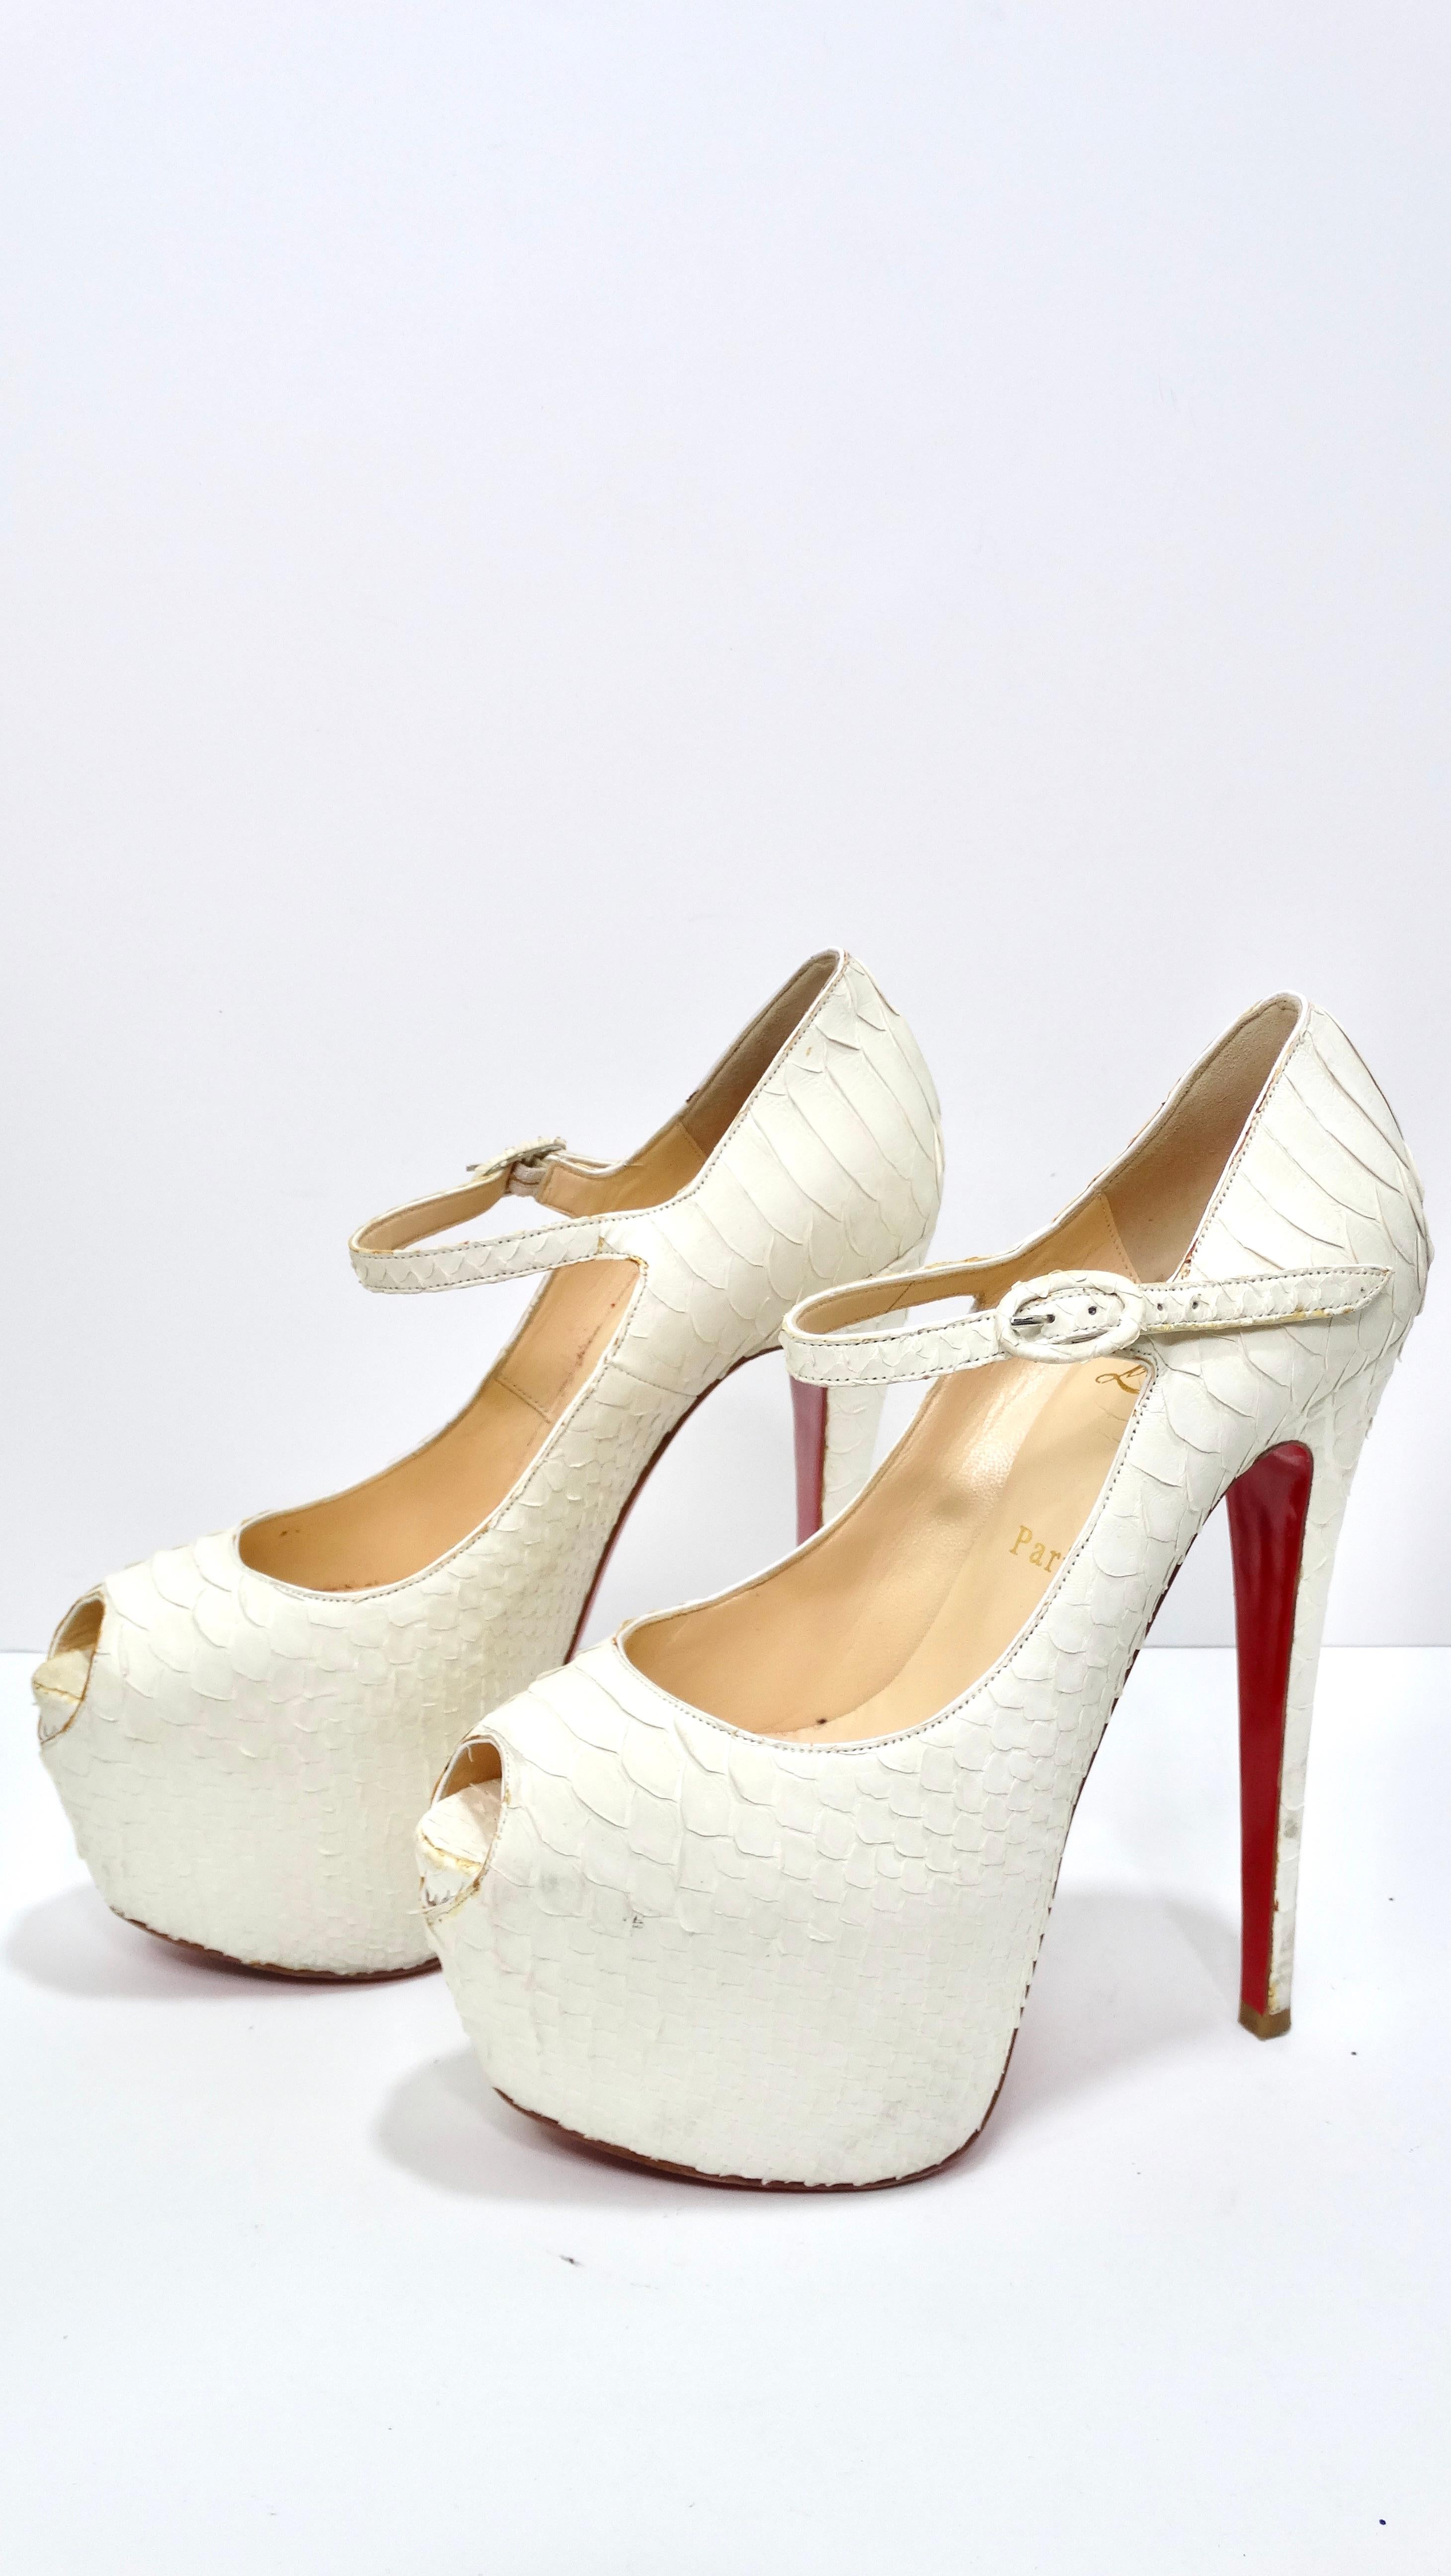 Christian Louboutin White Python Leather Platform Heels In Excellent Condition For Sale In Scottsdale, AZ